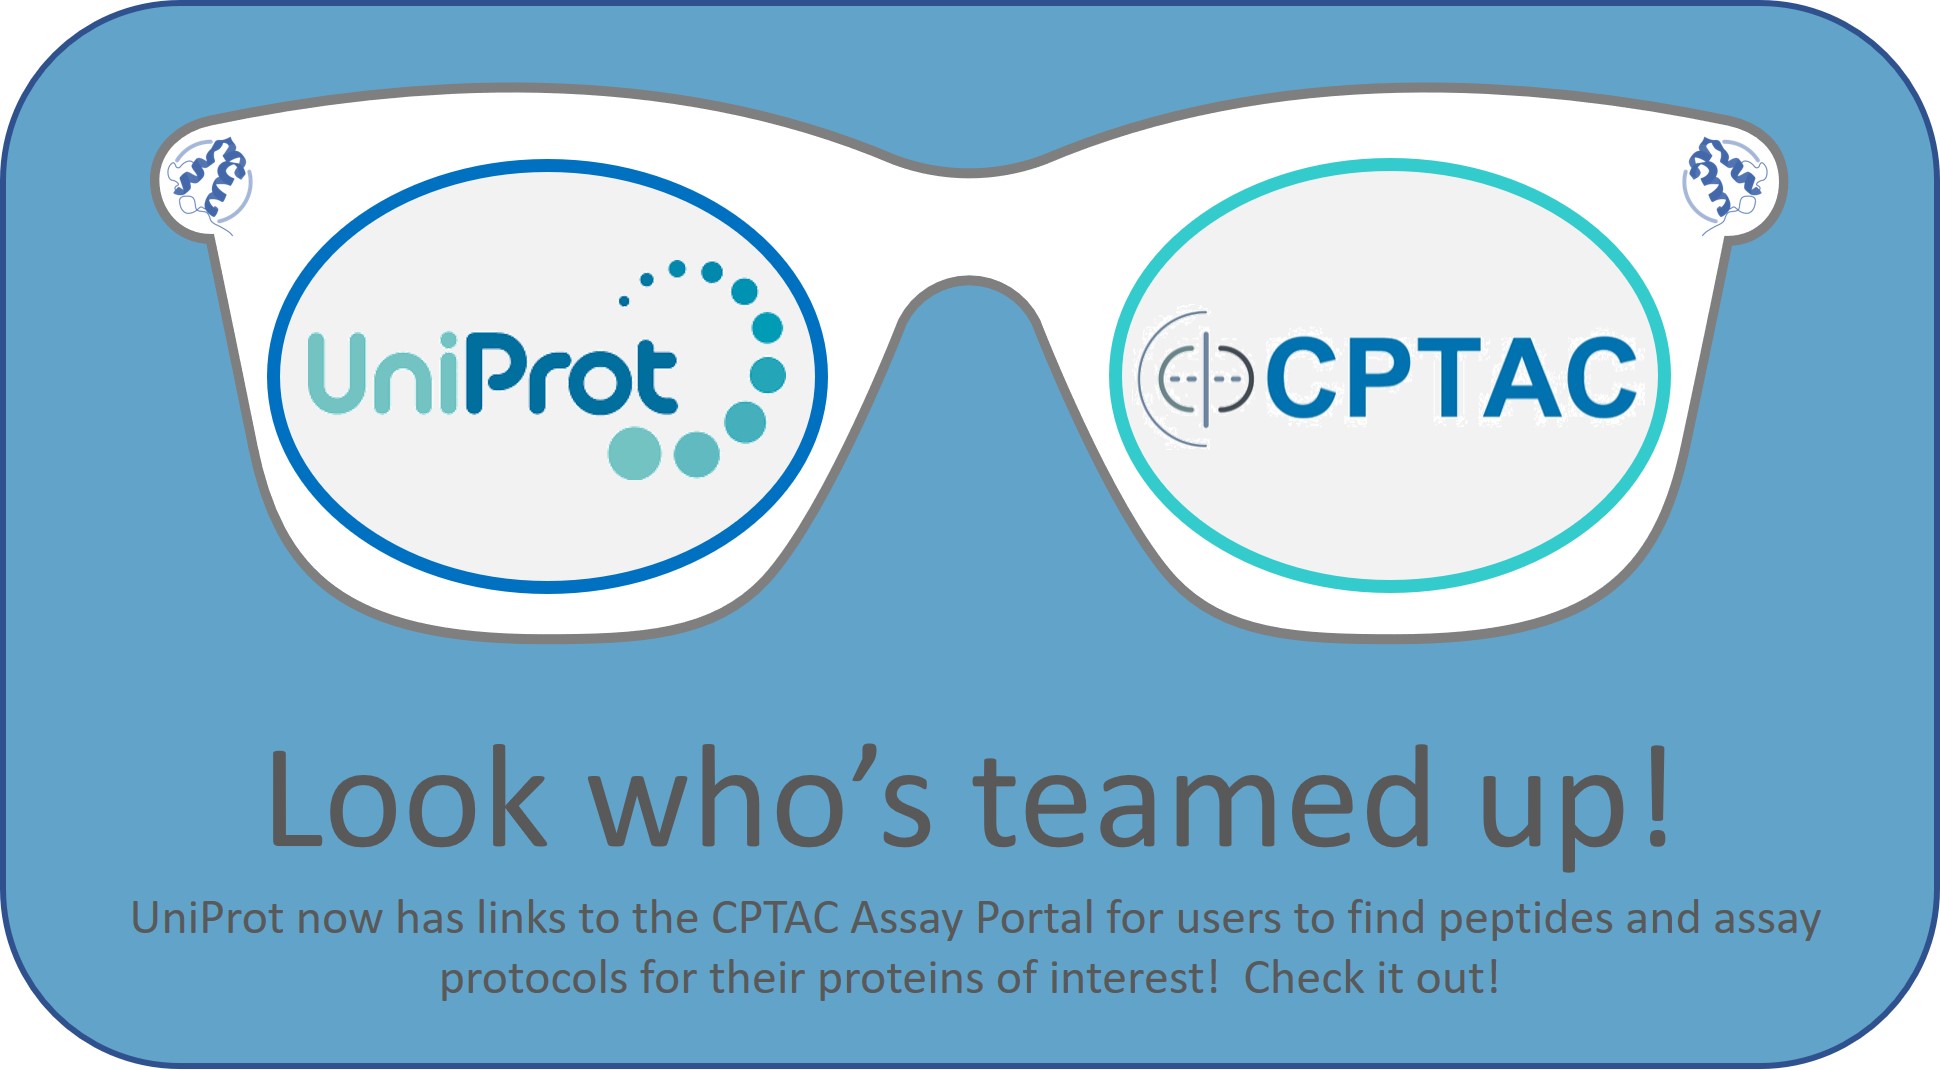 CPTAC and UniProt has teamed up